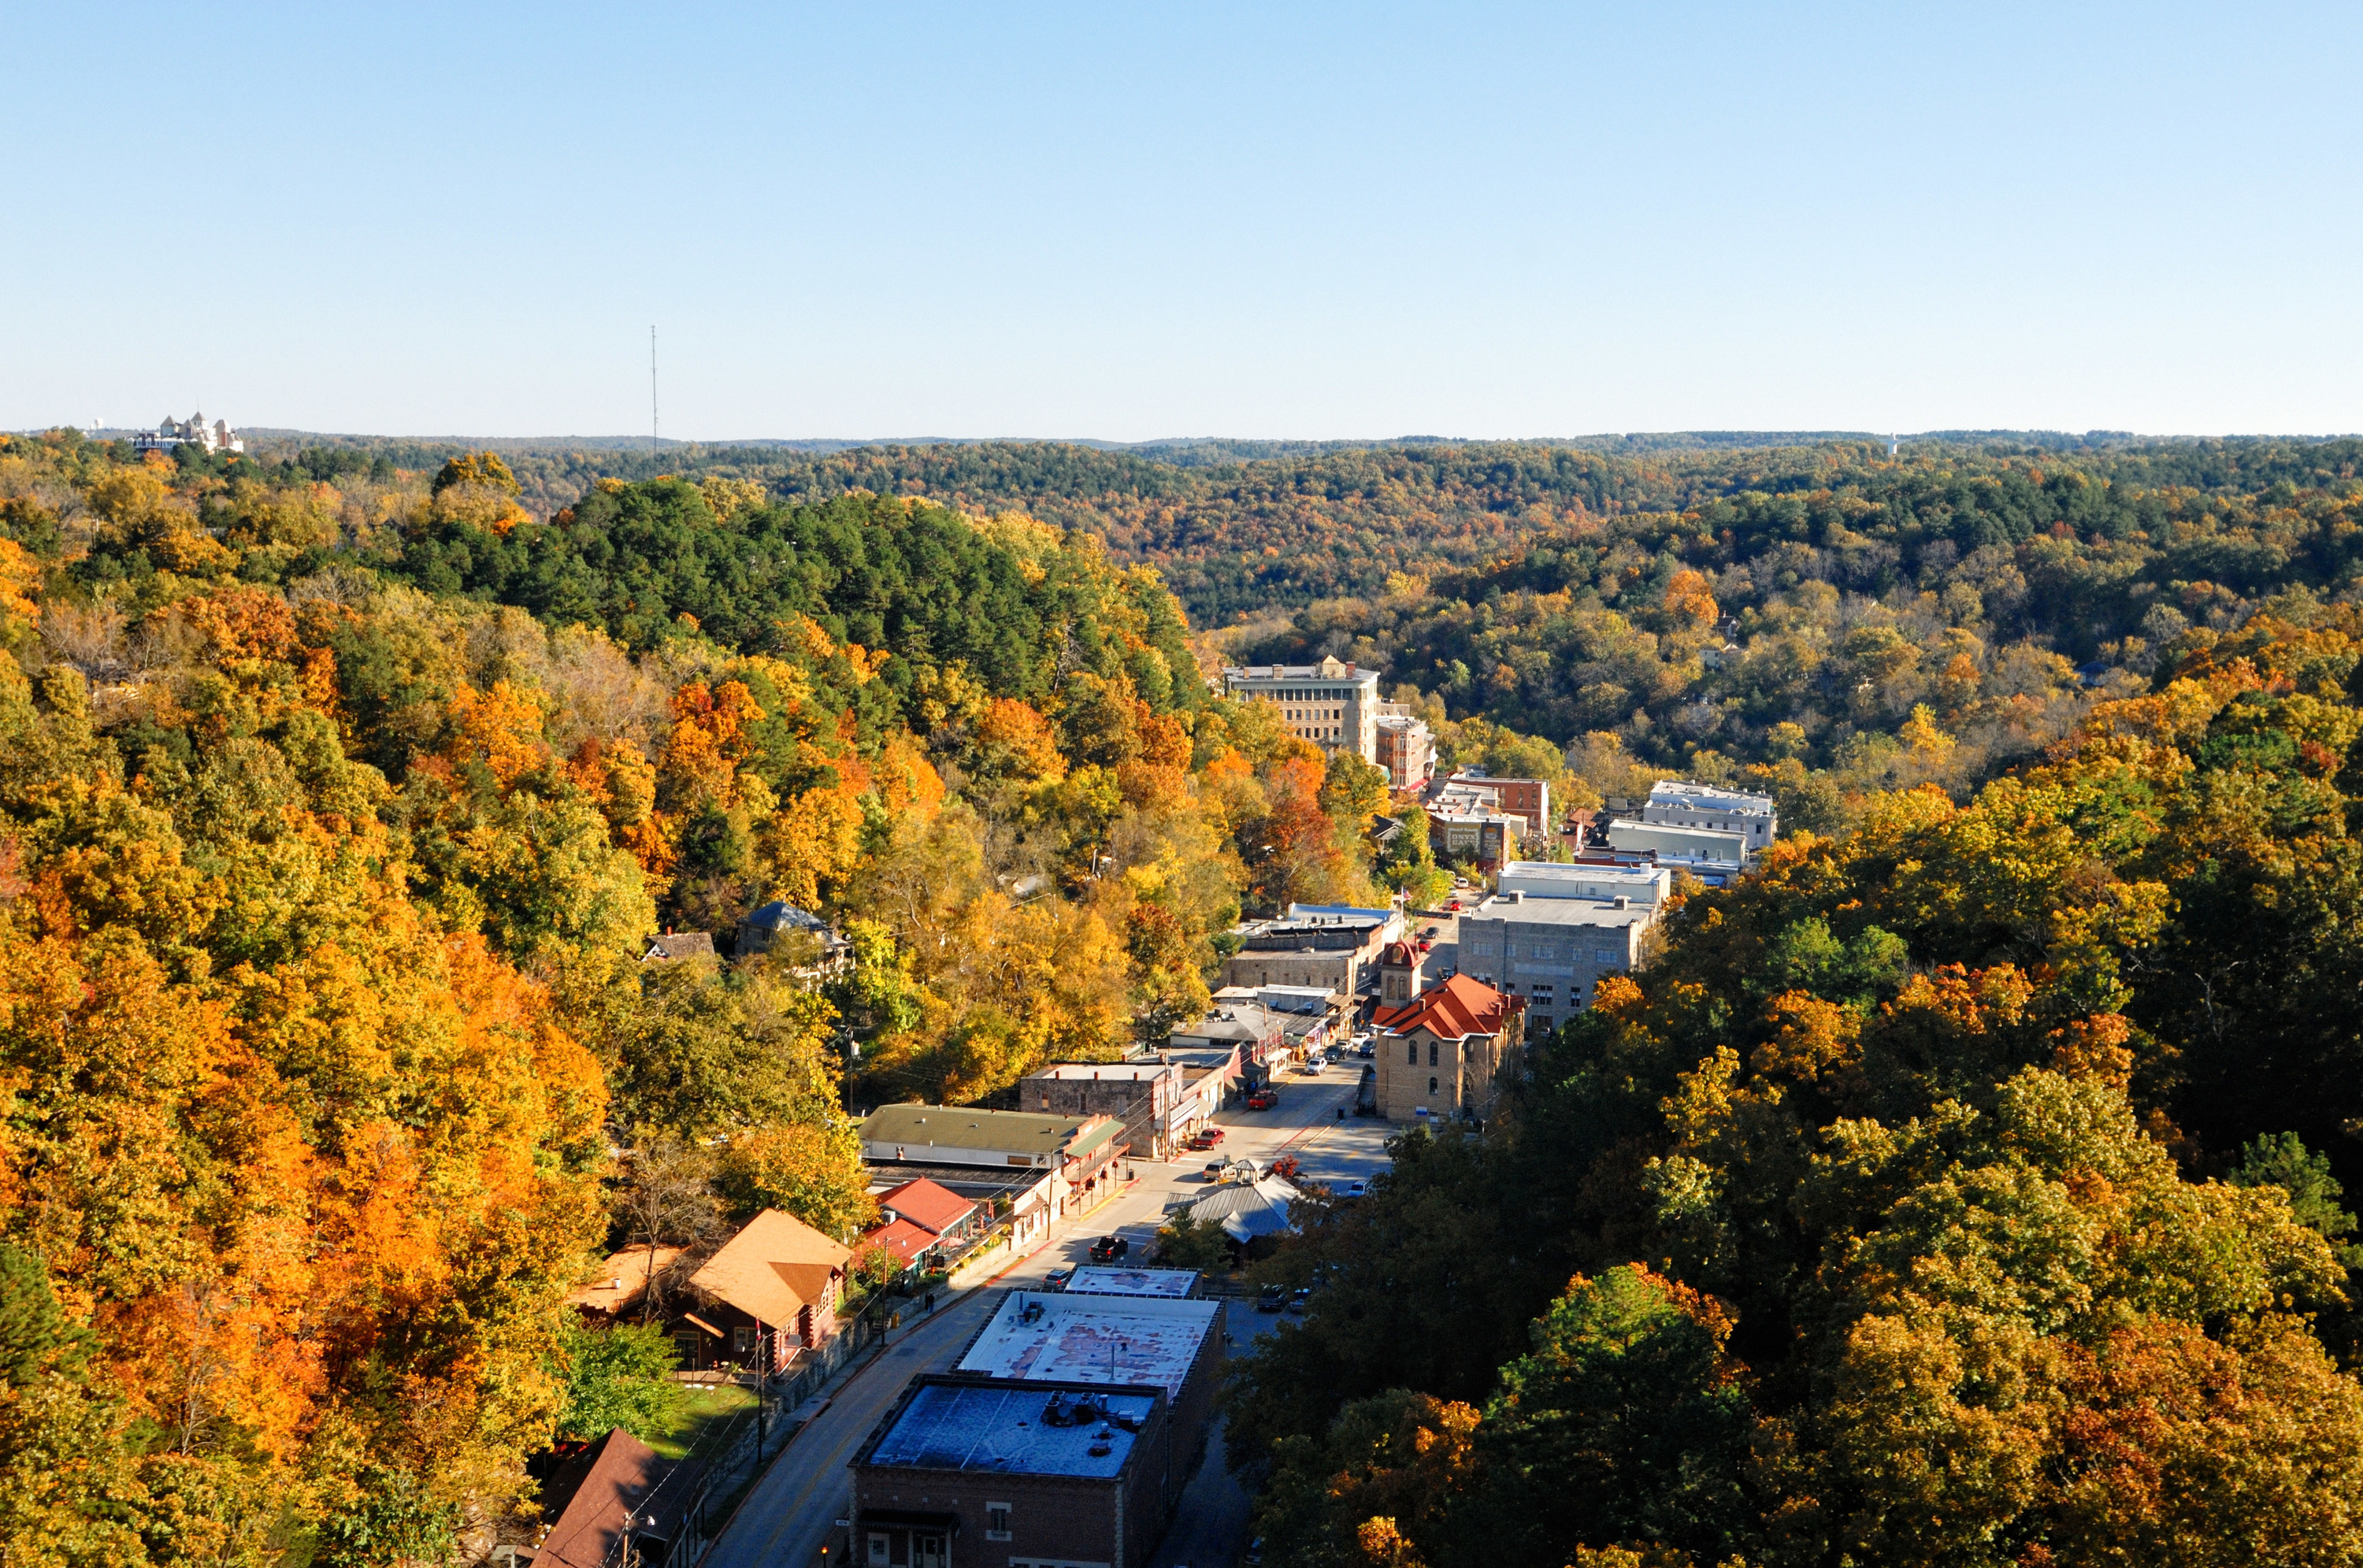 An overhead view of Eureka Springs and the surrounding lush woods in the Fall